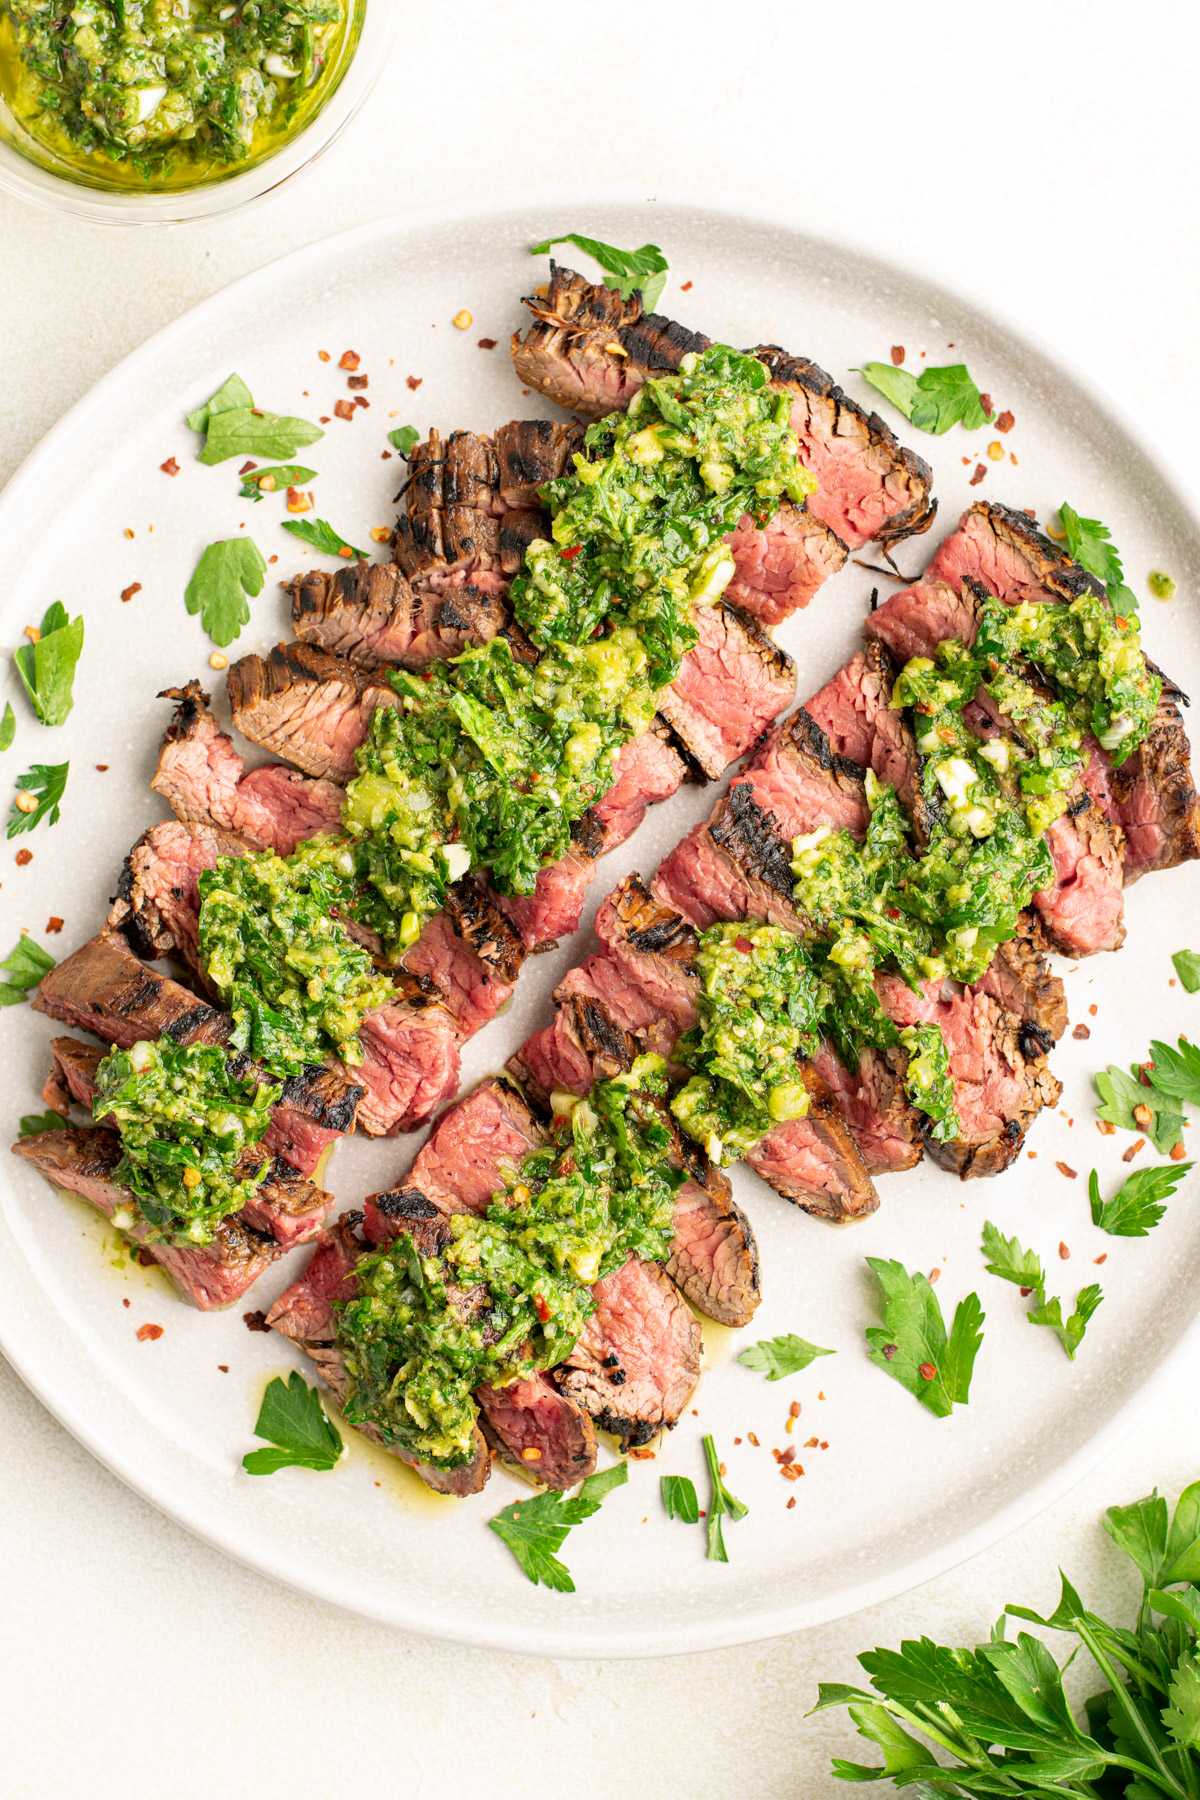 top view of sliced steak with chimichurri on top.